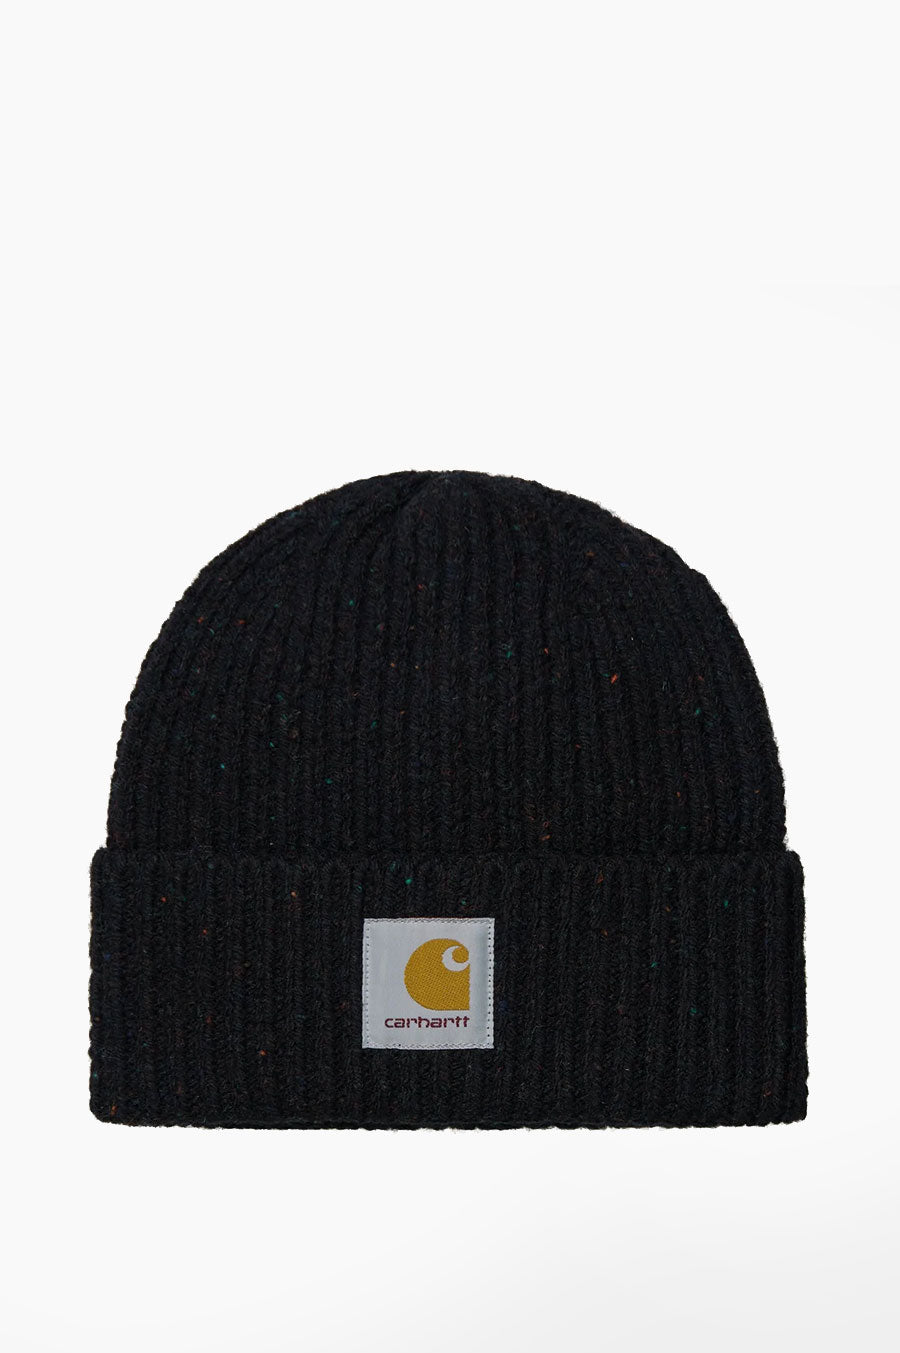 CARHARTT WIP ANGLISTIC BEANIE SPECKLED BLACK – BLENDS